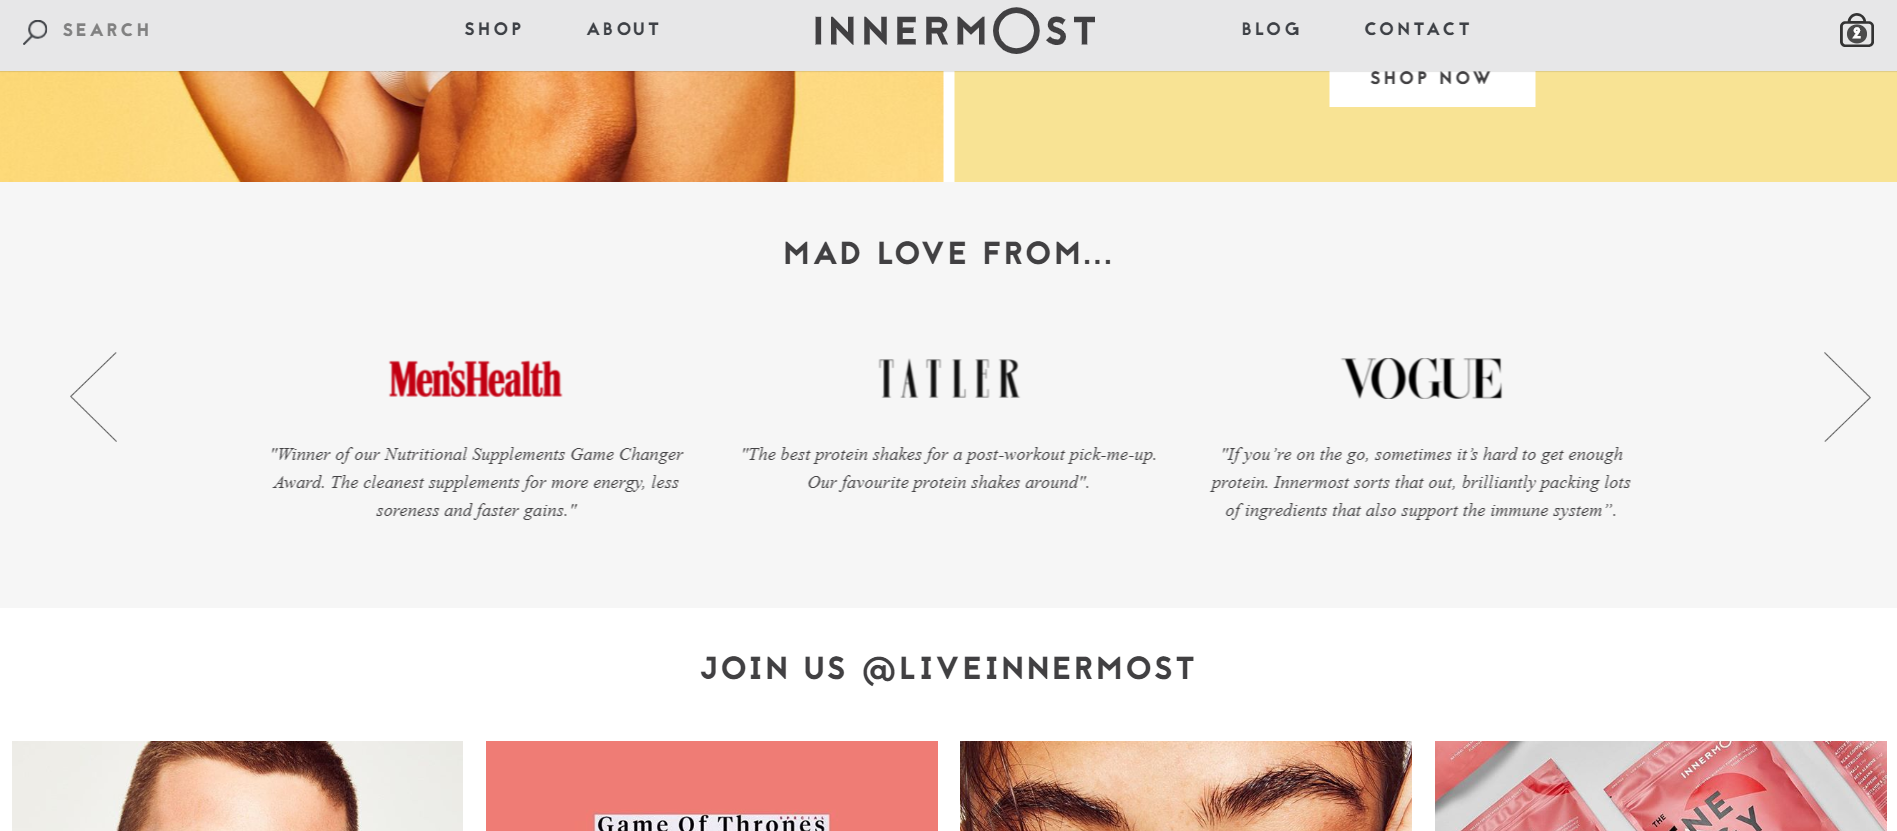 A screenshot of Innermost's homepage showing publication logos and quotes.